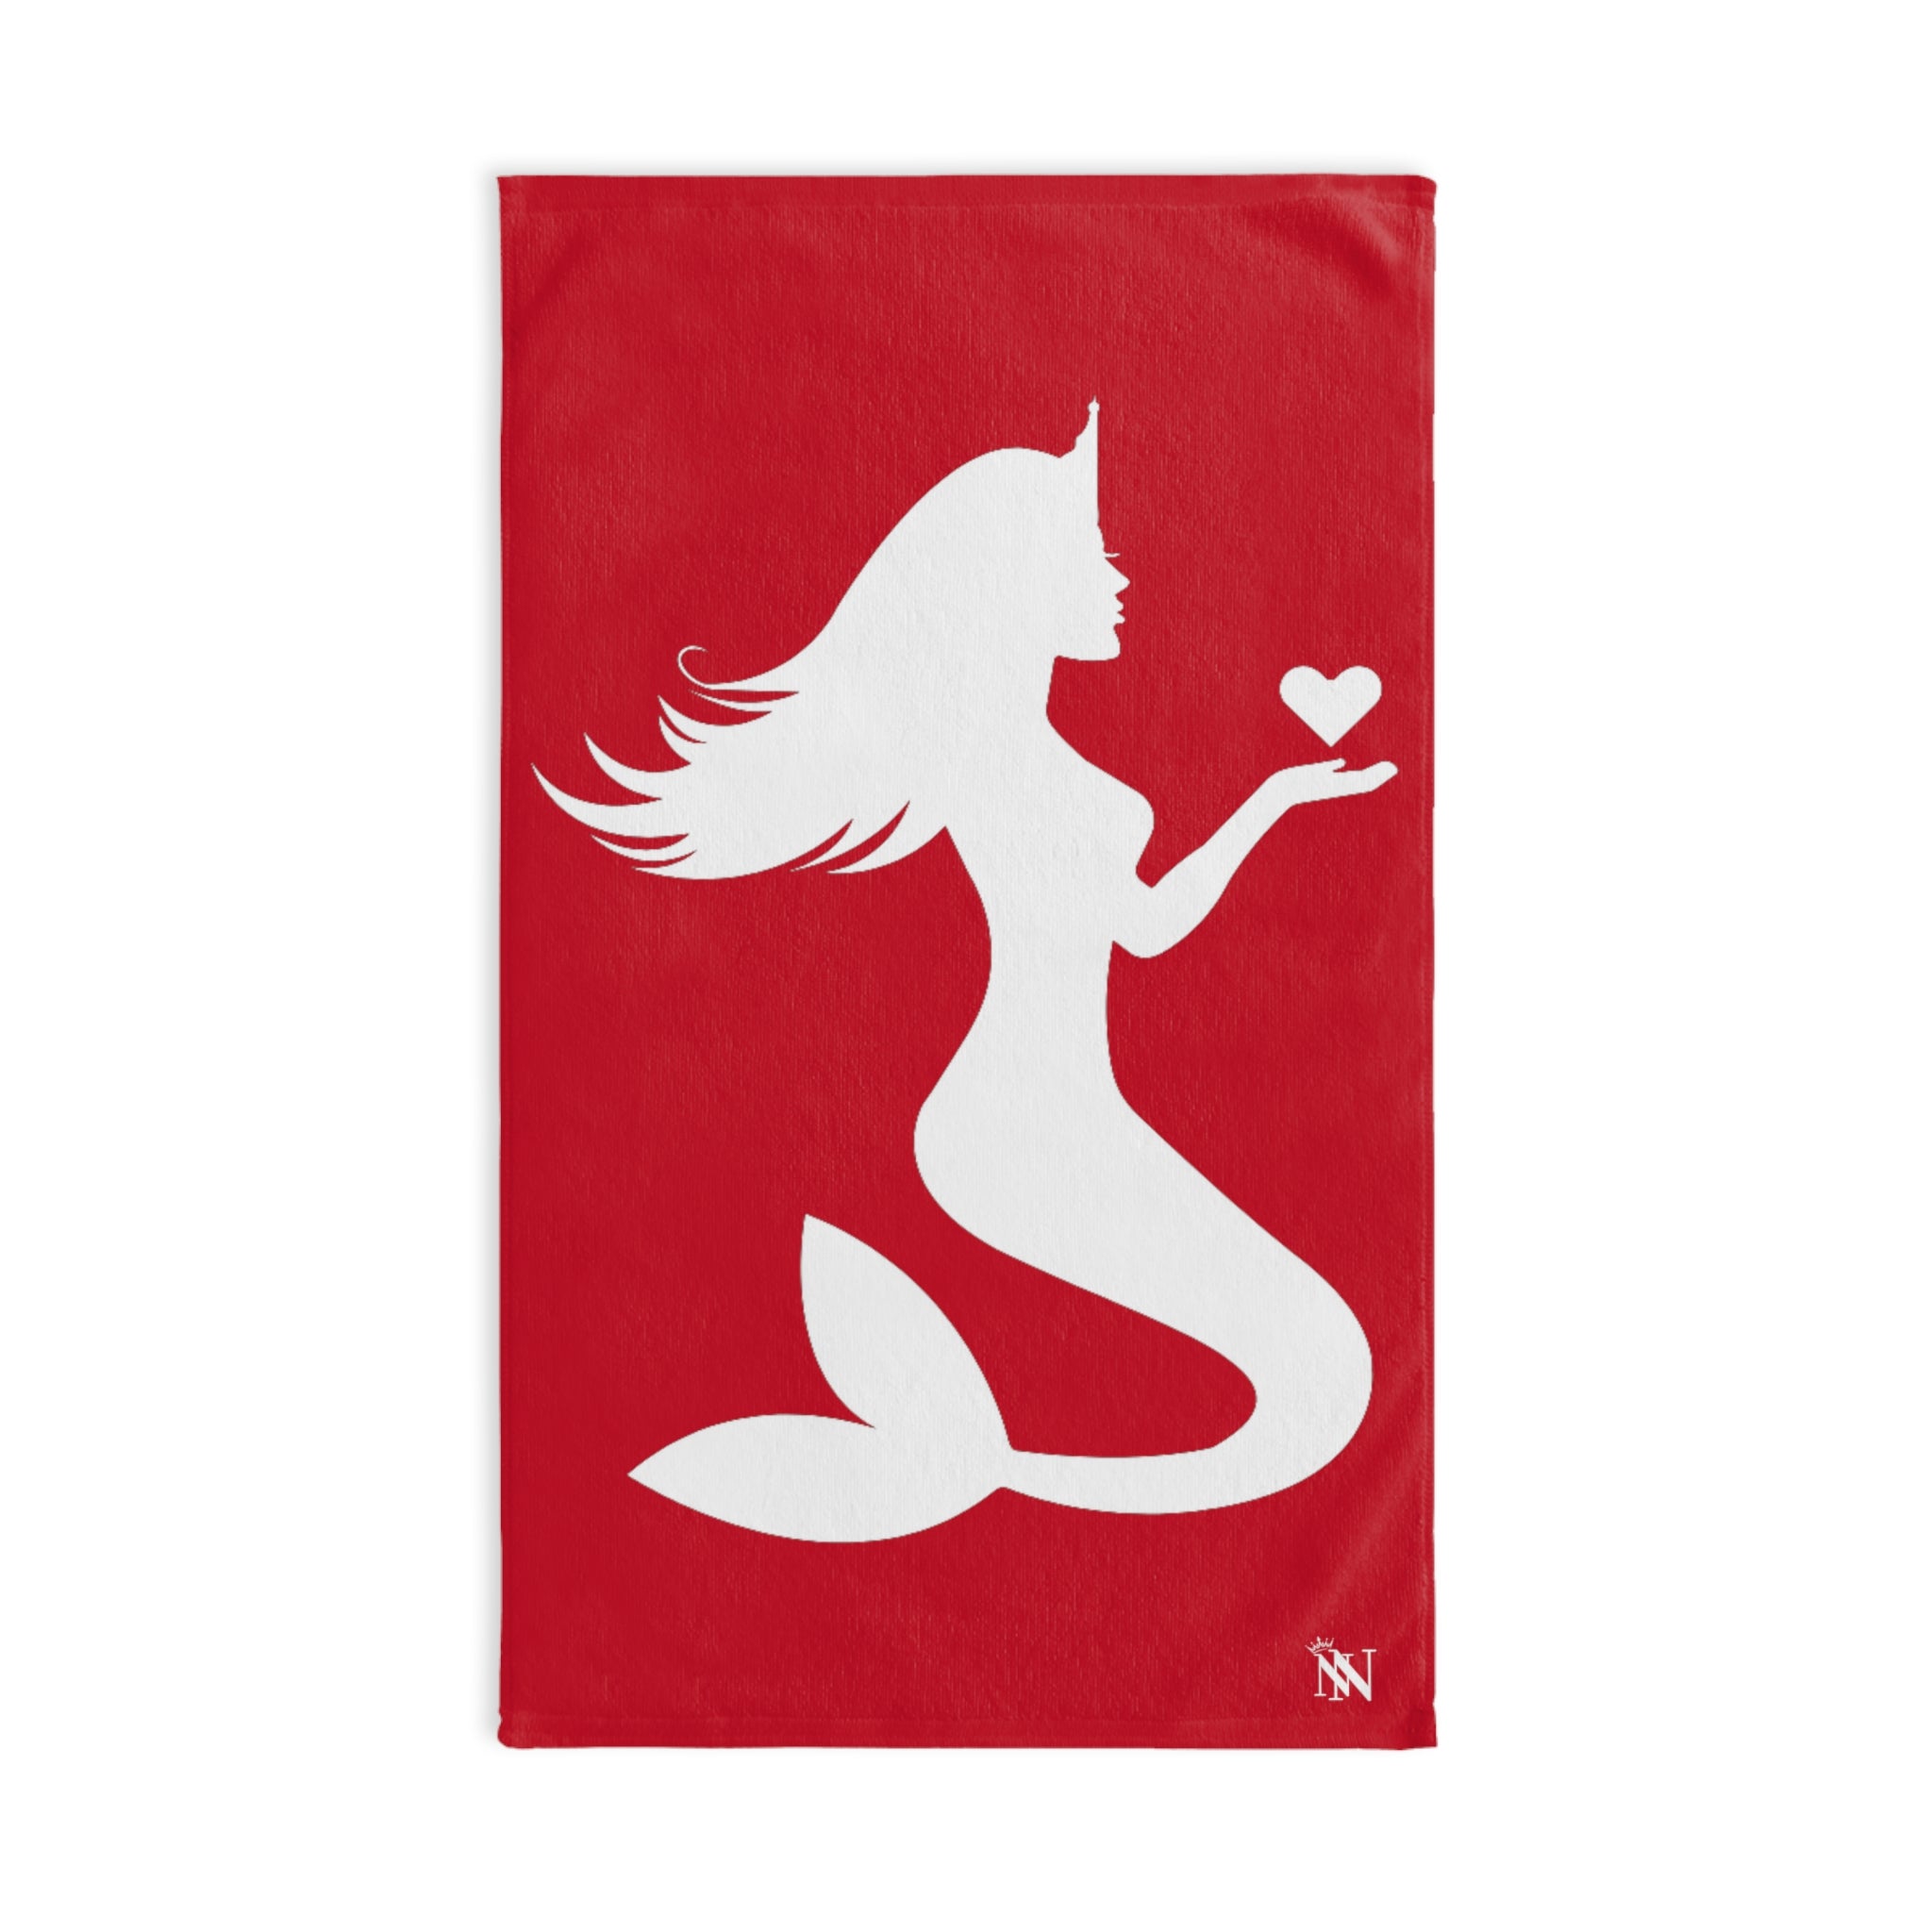 Pray Mermaid HeartRed | Sexy Gifts for Boyfriend, Funny Towel Romantic Gift for Wedding Couple Fiance First Year 2nd Anniversary Valentines, Party Gag Gifts, Joke Humor Cloth for Husband Men BF NECTAR NAPKINS